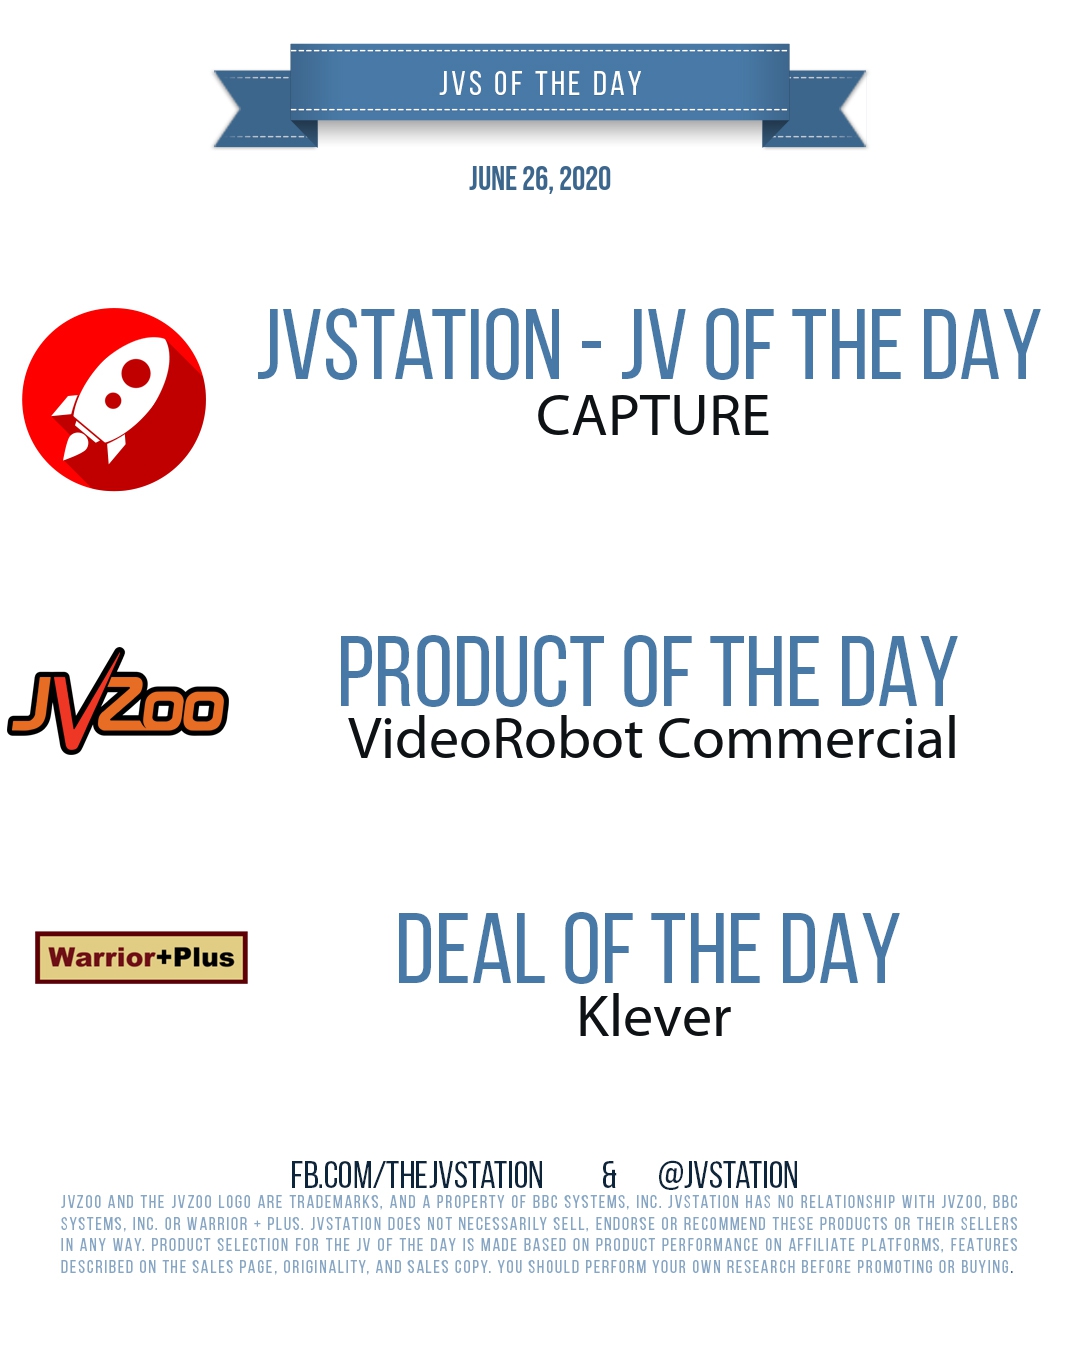 JVs of the day - June 26, 2020